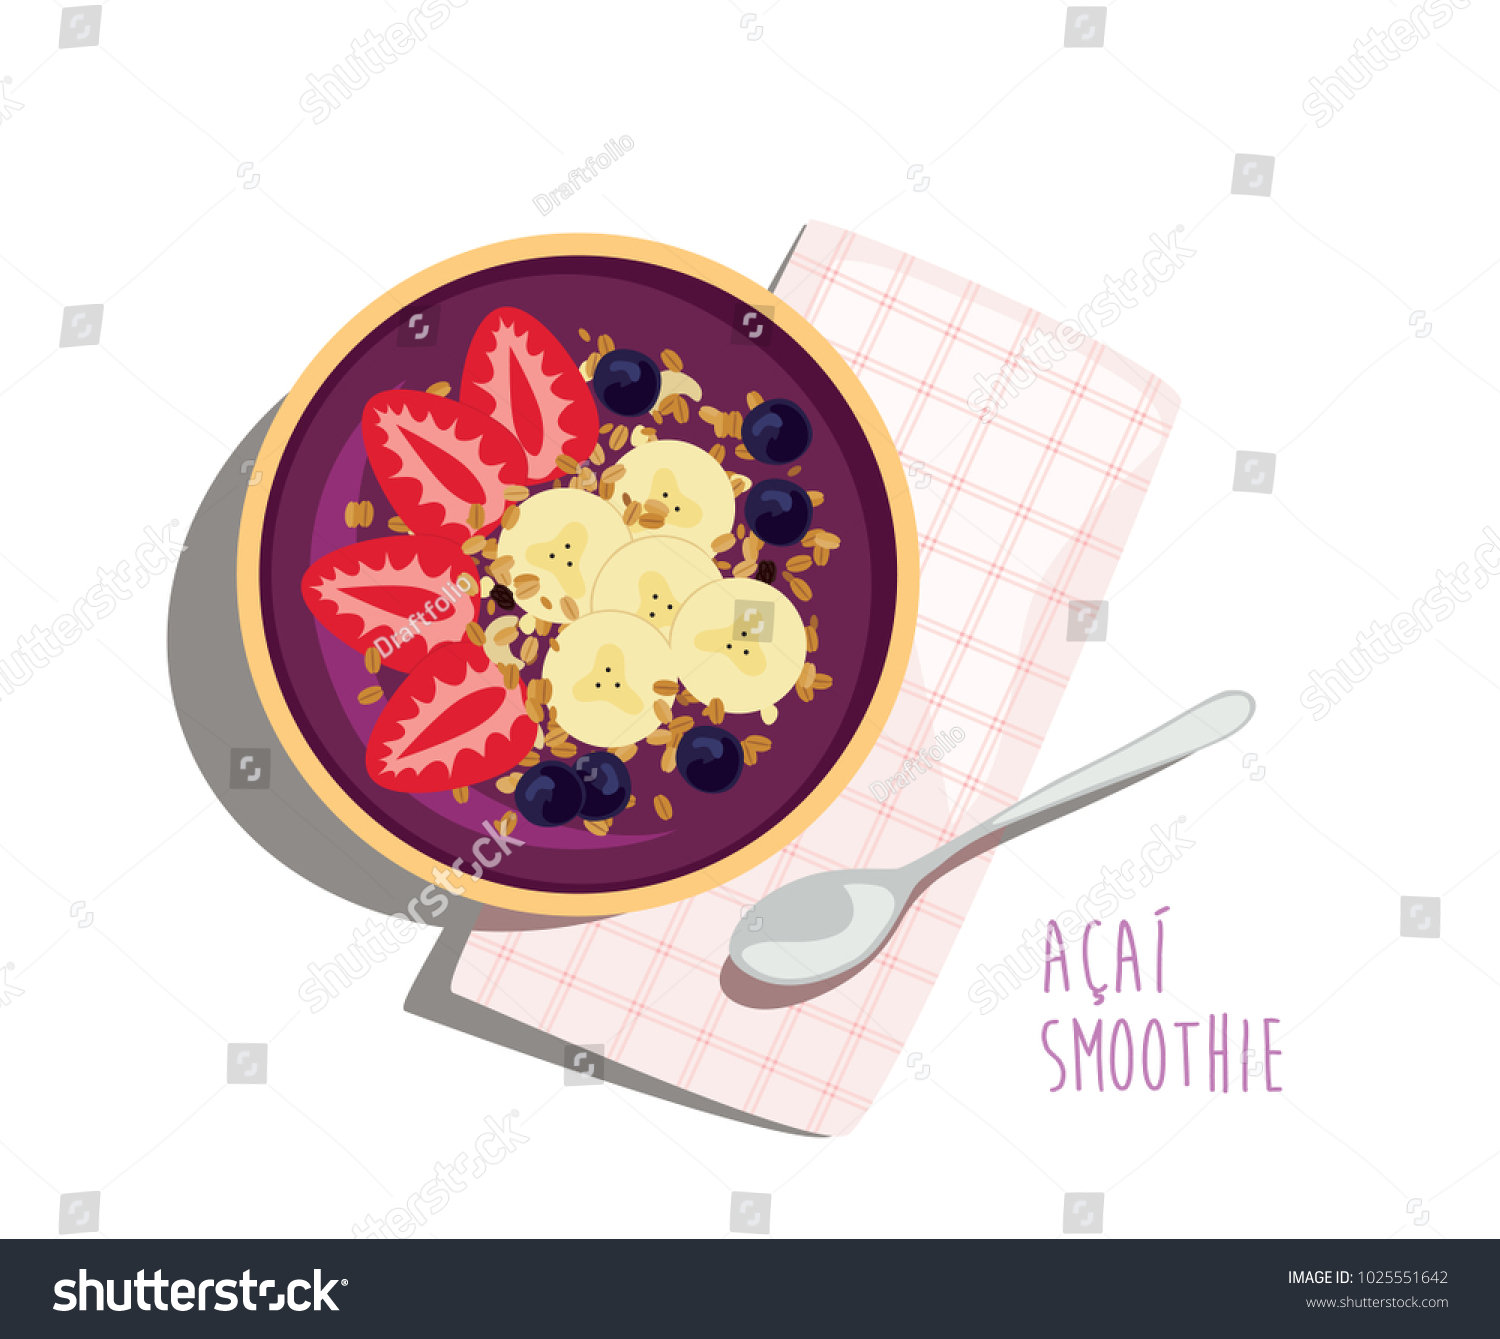 Acai Smoothie Bowl - Acai fruit energy bowl with strawberries, banana and granola topping. Healthy summer meal with napkin and spoon. Top view isolated vector illustration. #1025551642